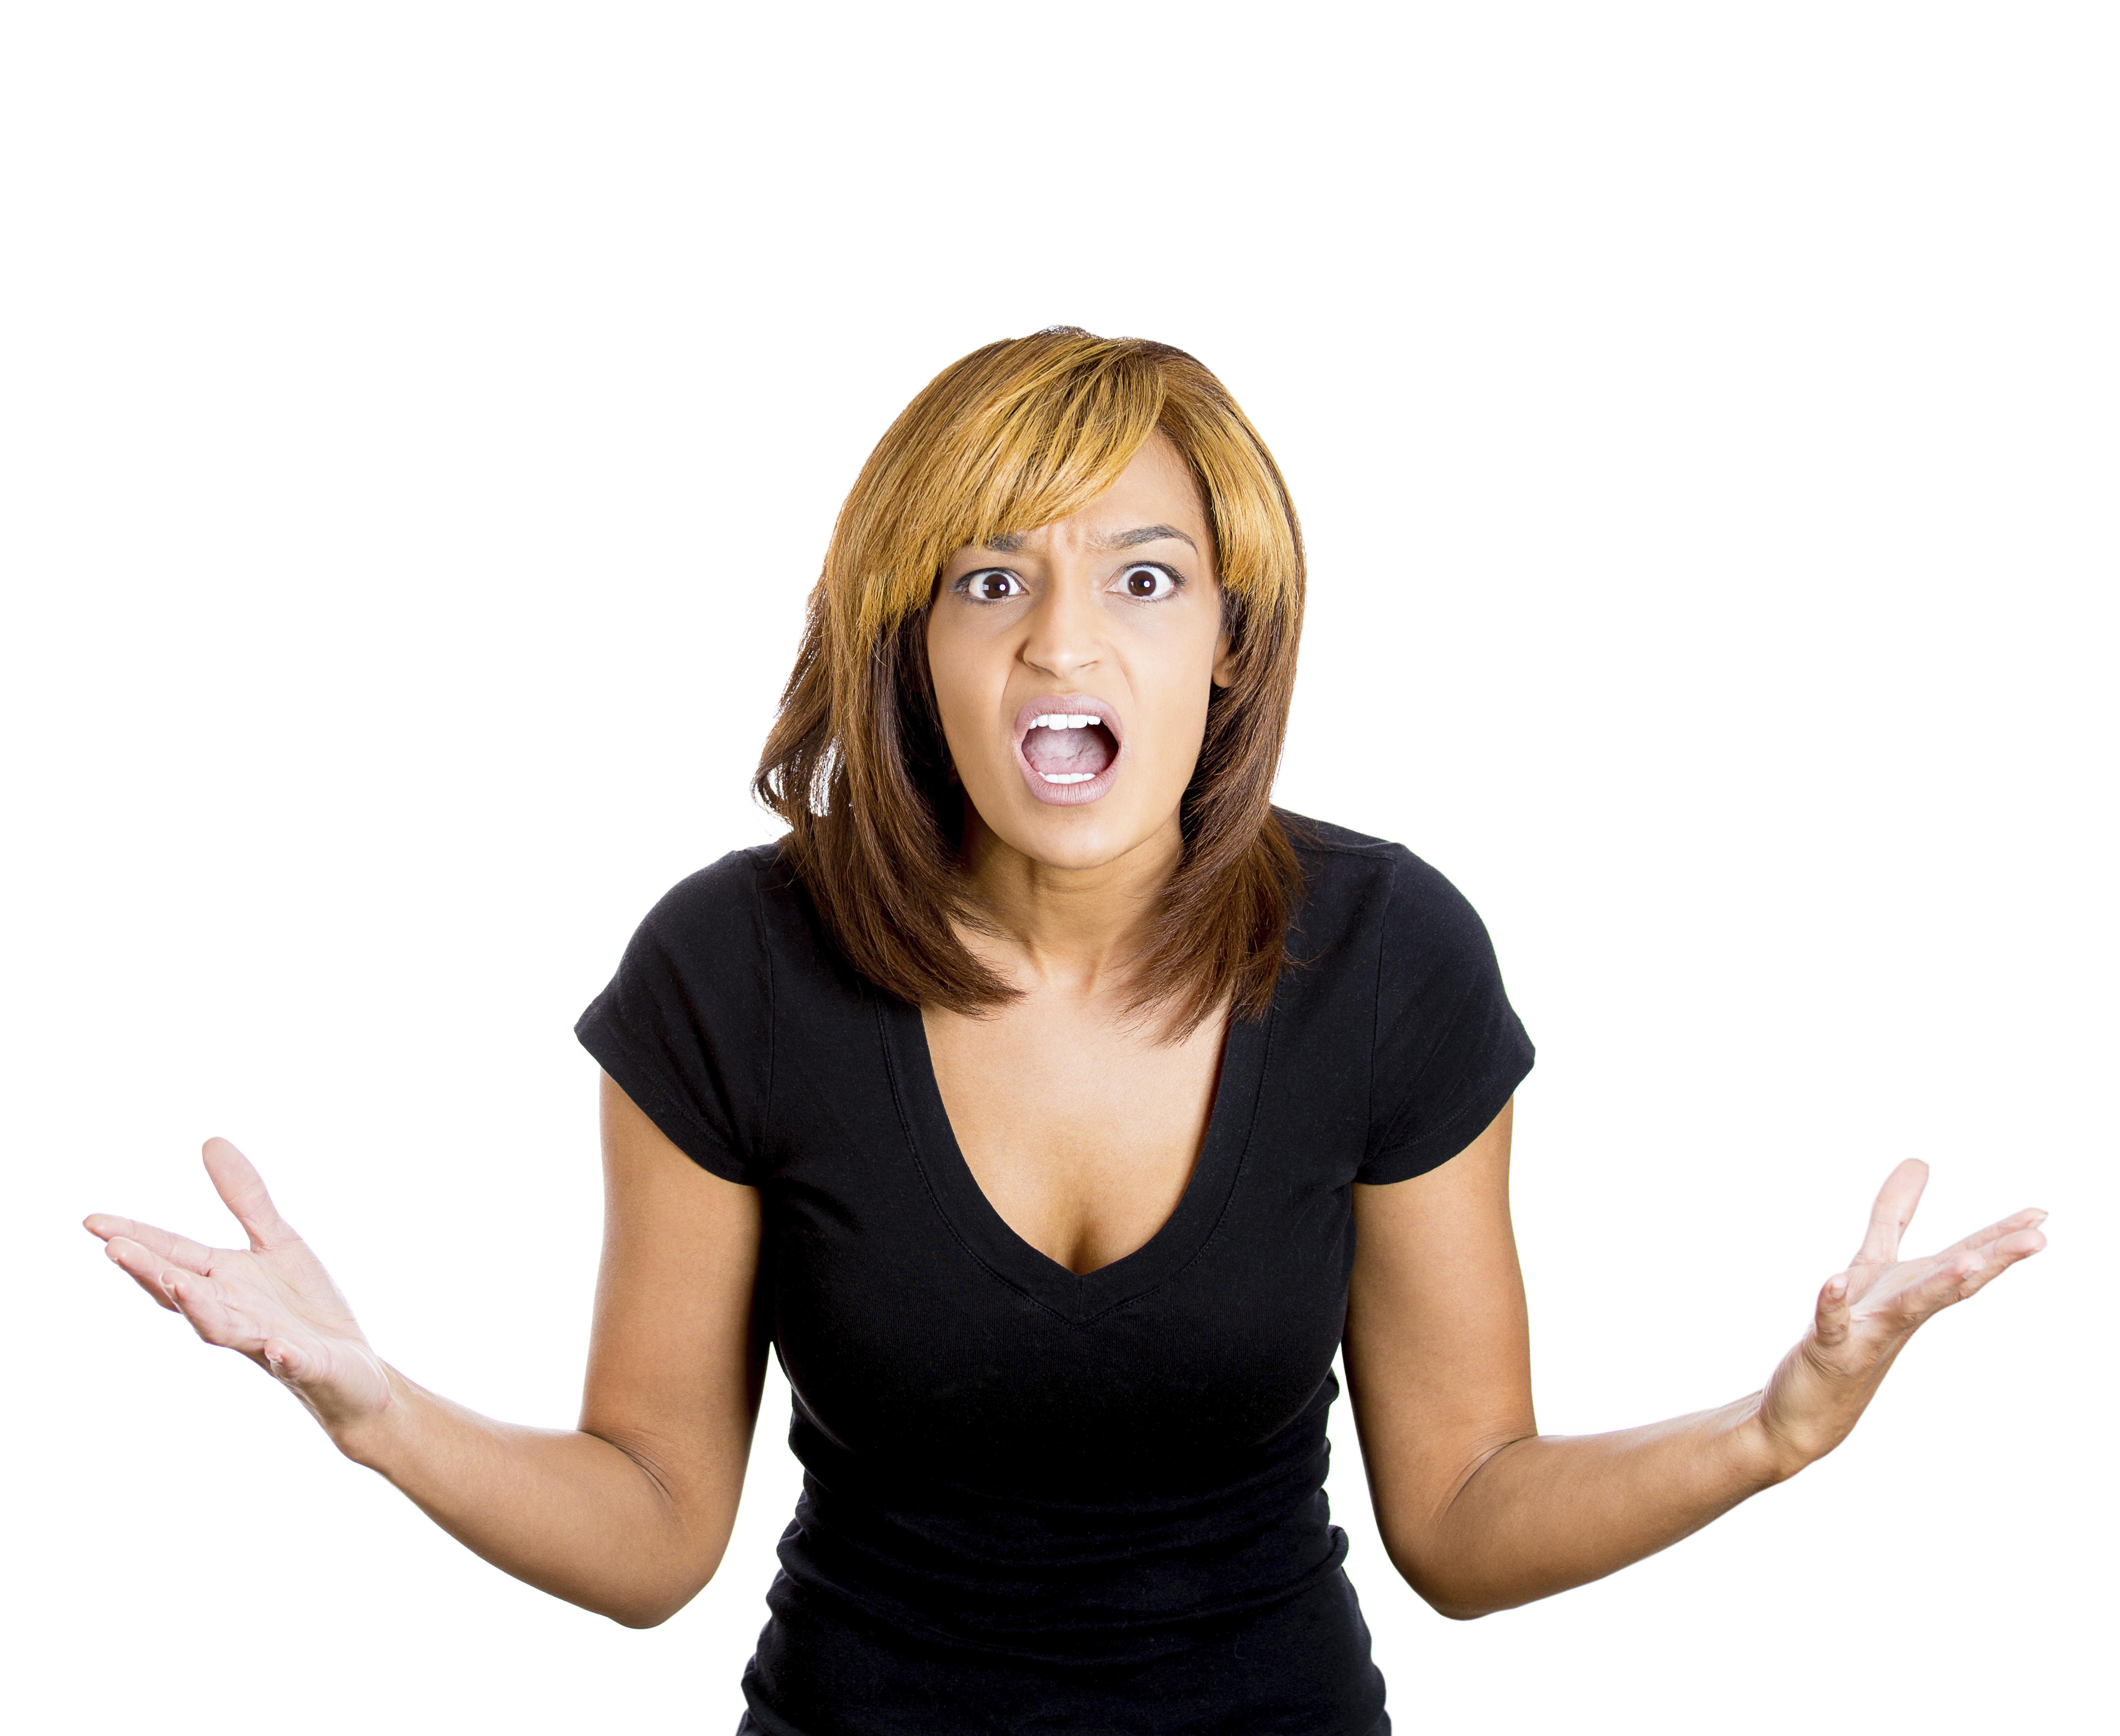 Closeup portrait of angry, upset screaming business woman, boss, student, worker, employee going through conflict in her life, isolated on white background. Negative human emotions, face expressions